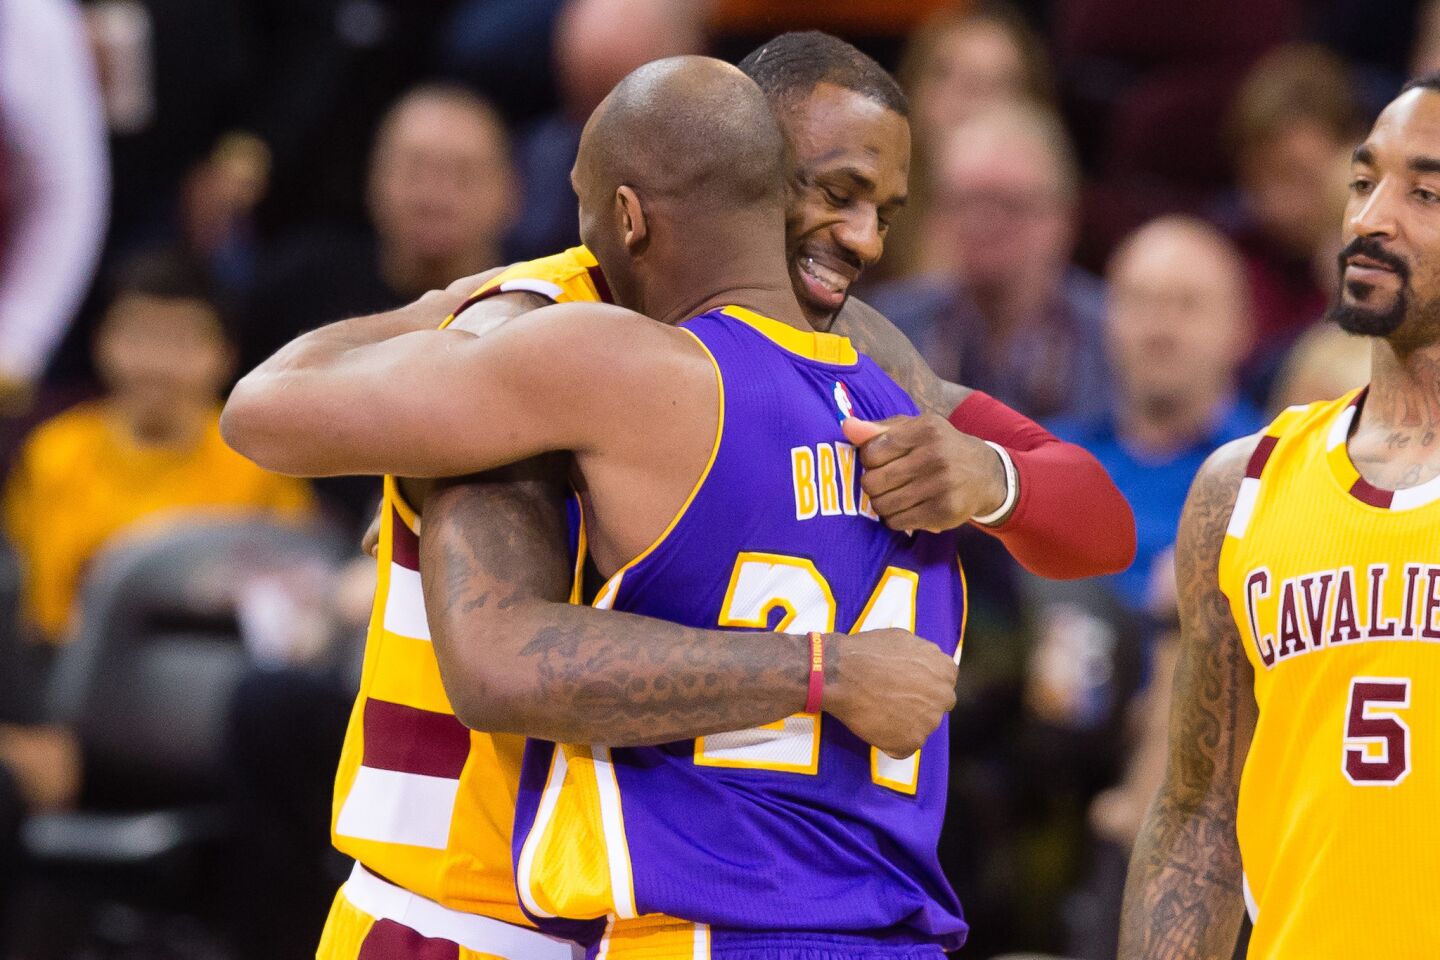 Kobe Bryant and LeBron James embrace before the Cavaliers hosted the Lakers on Thursday in Cleveland.